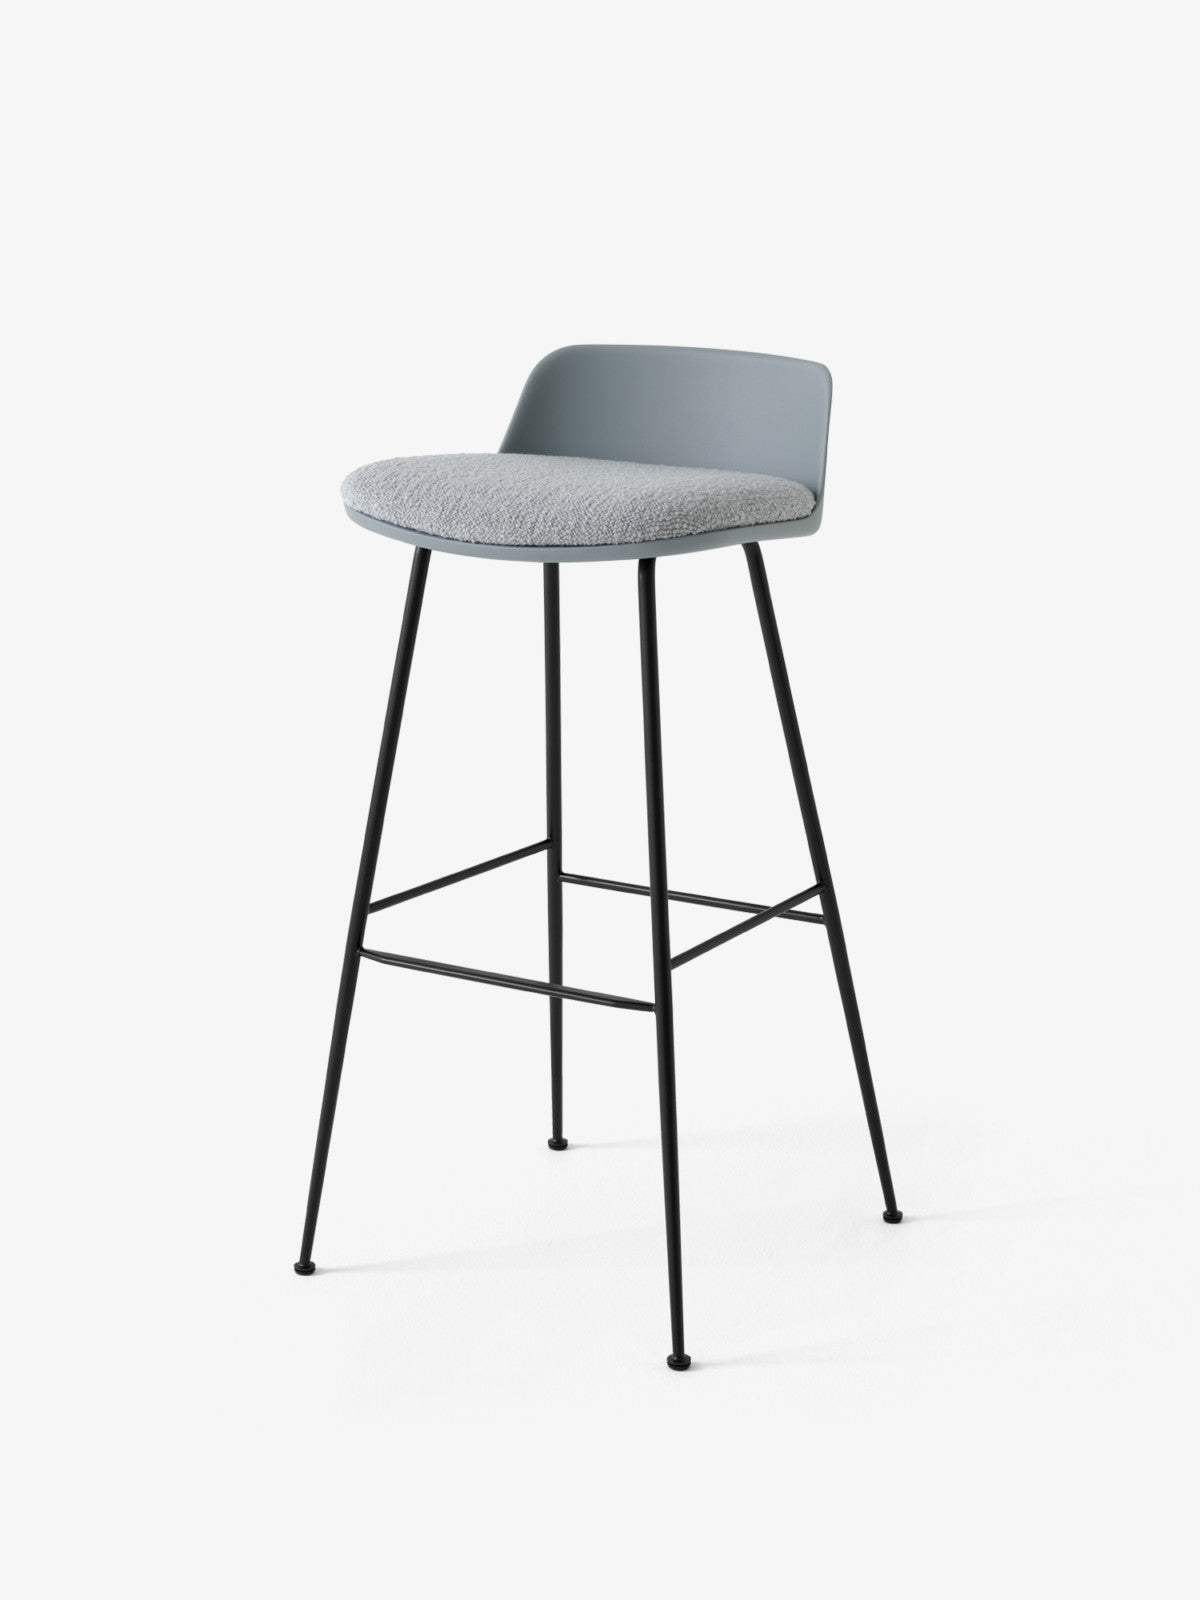 Rely Bar Stool HW87 Seat Upholstery